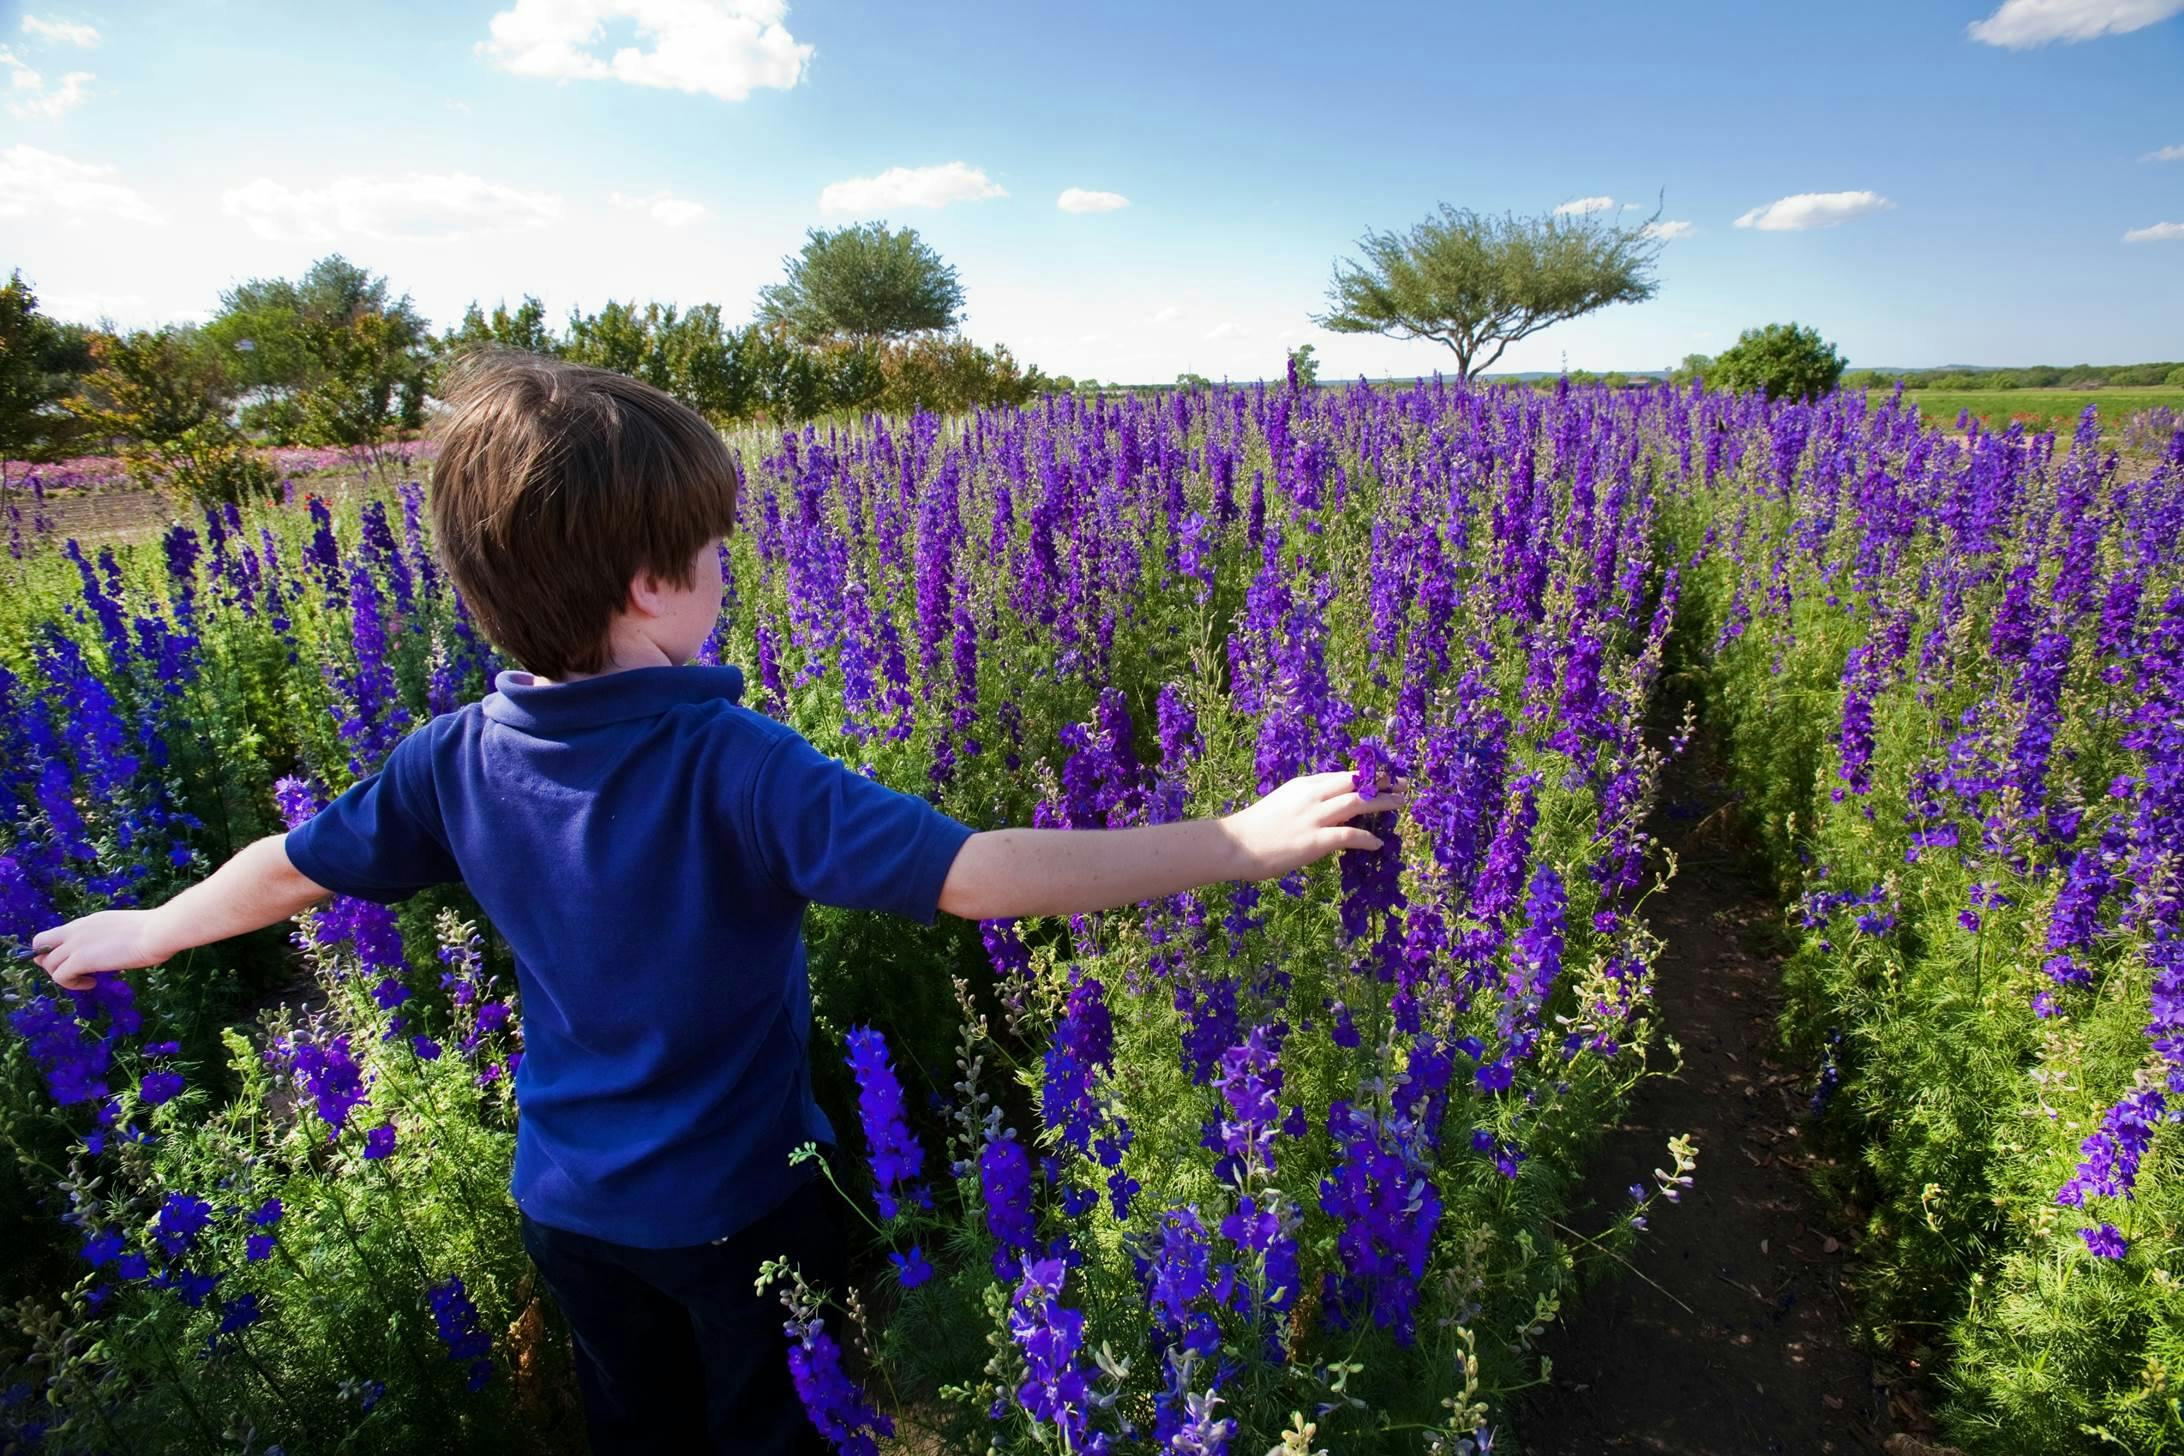 Bluebonnets blossom at Wildseed Farms, said to be the largest wildflower farm in the country.